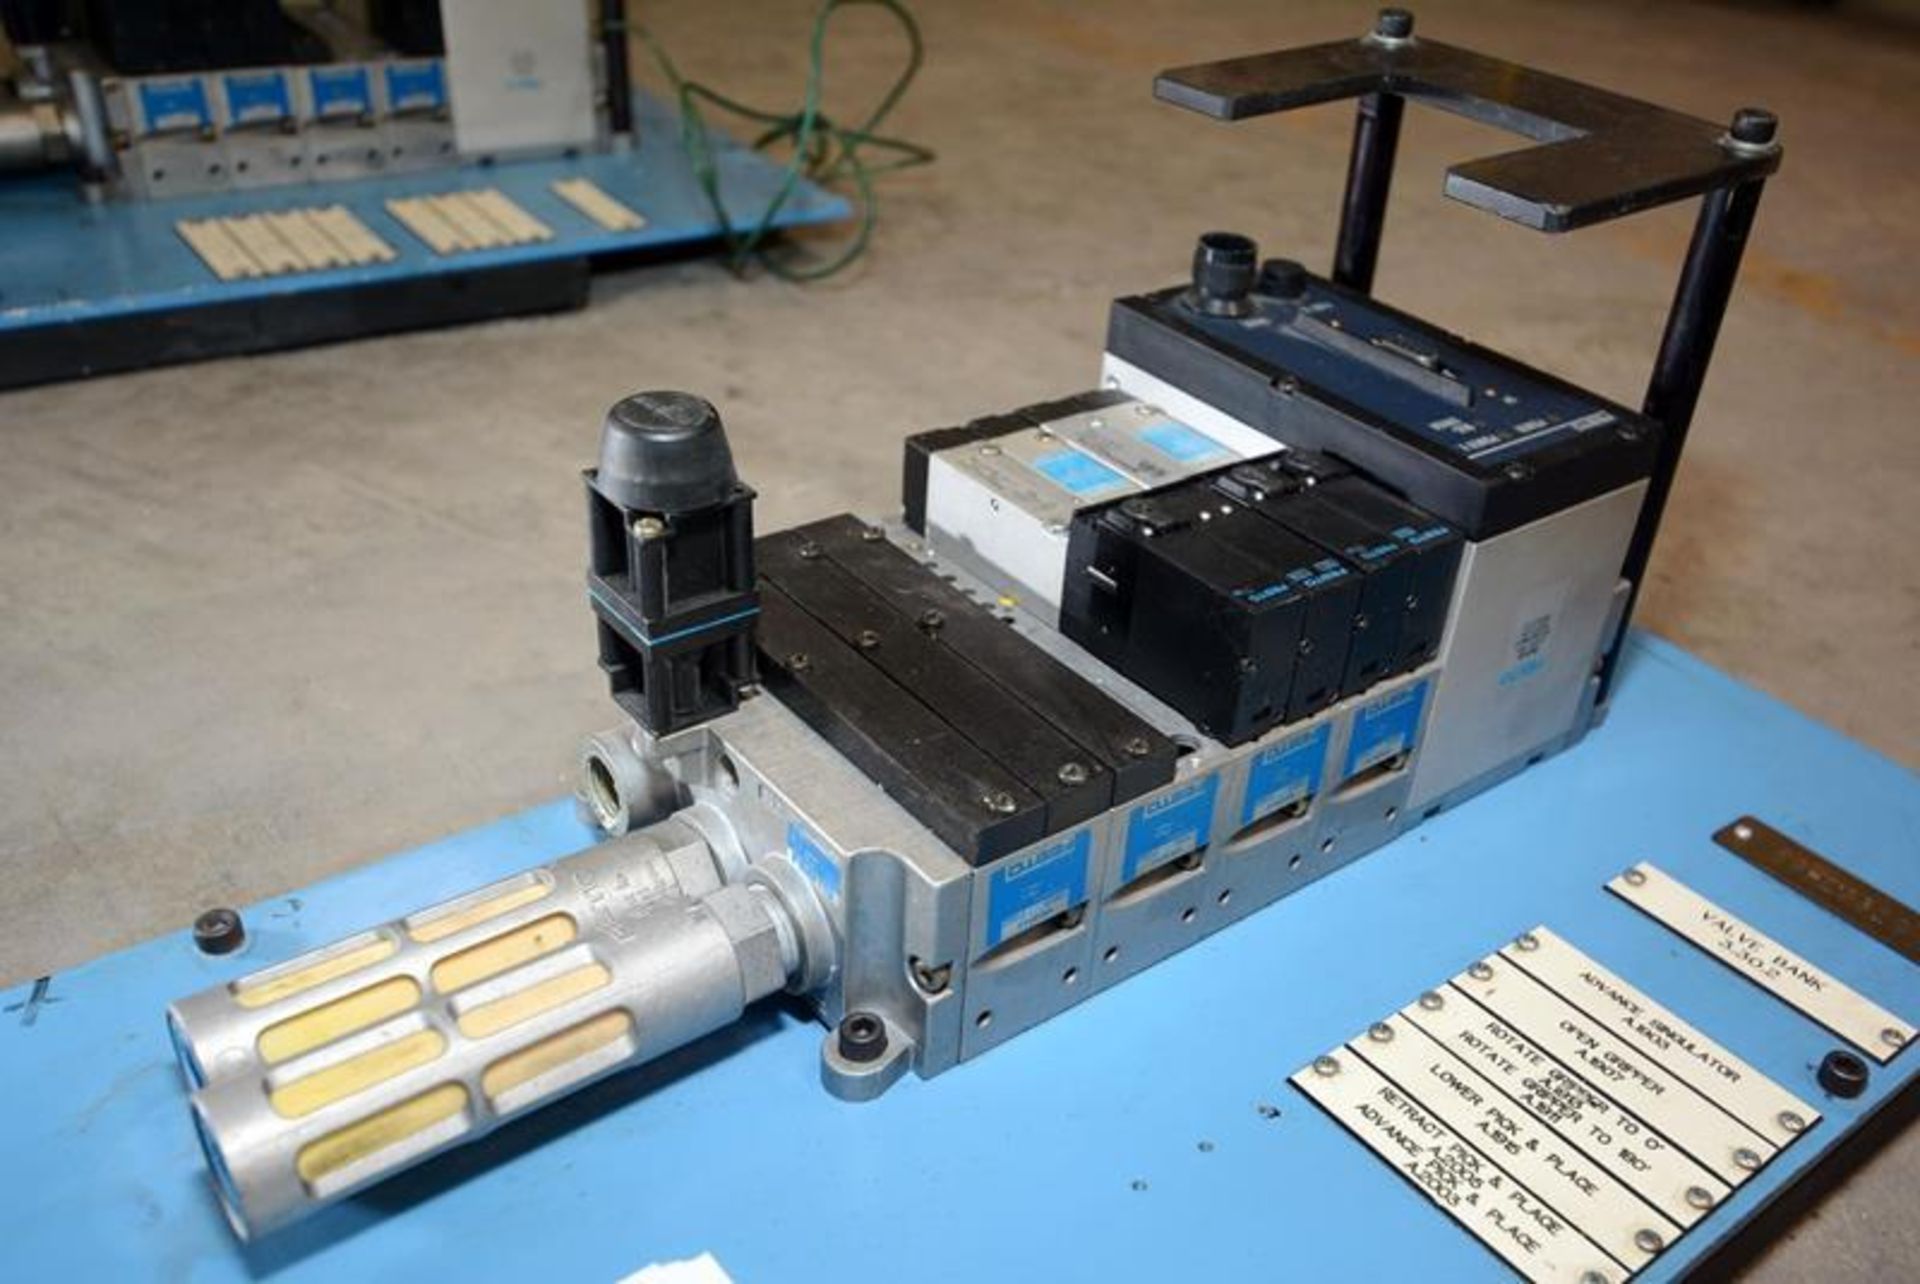 I/O's, valve bench for profibus comunication. Brand: FESTO. Model: IFB13-03. Year: N/A. Serial